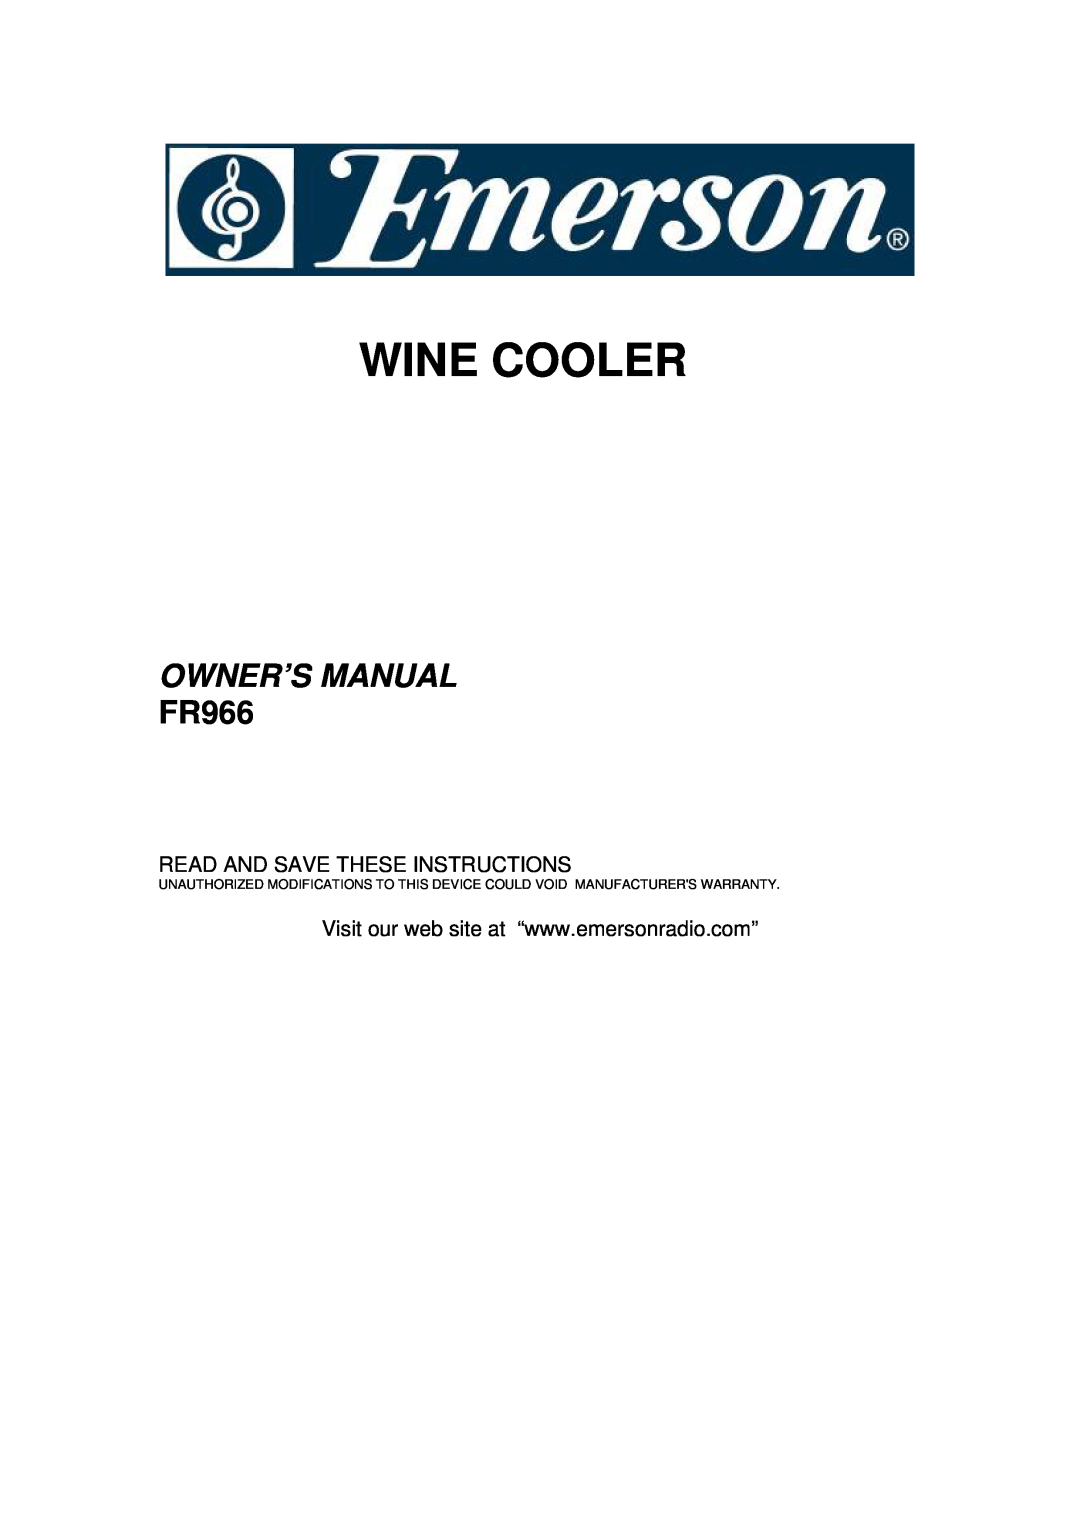 Emerson FR966 owner manual Wine Cooler, Read And Save These Instructions 